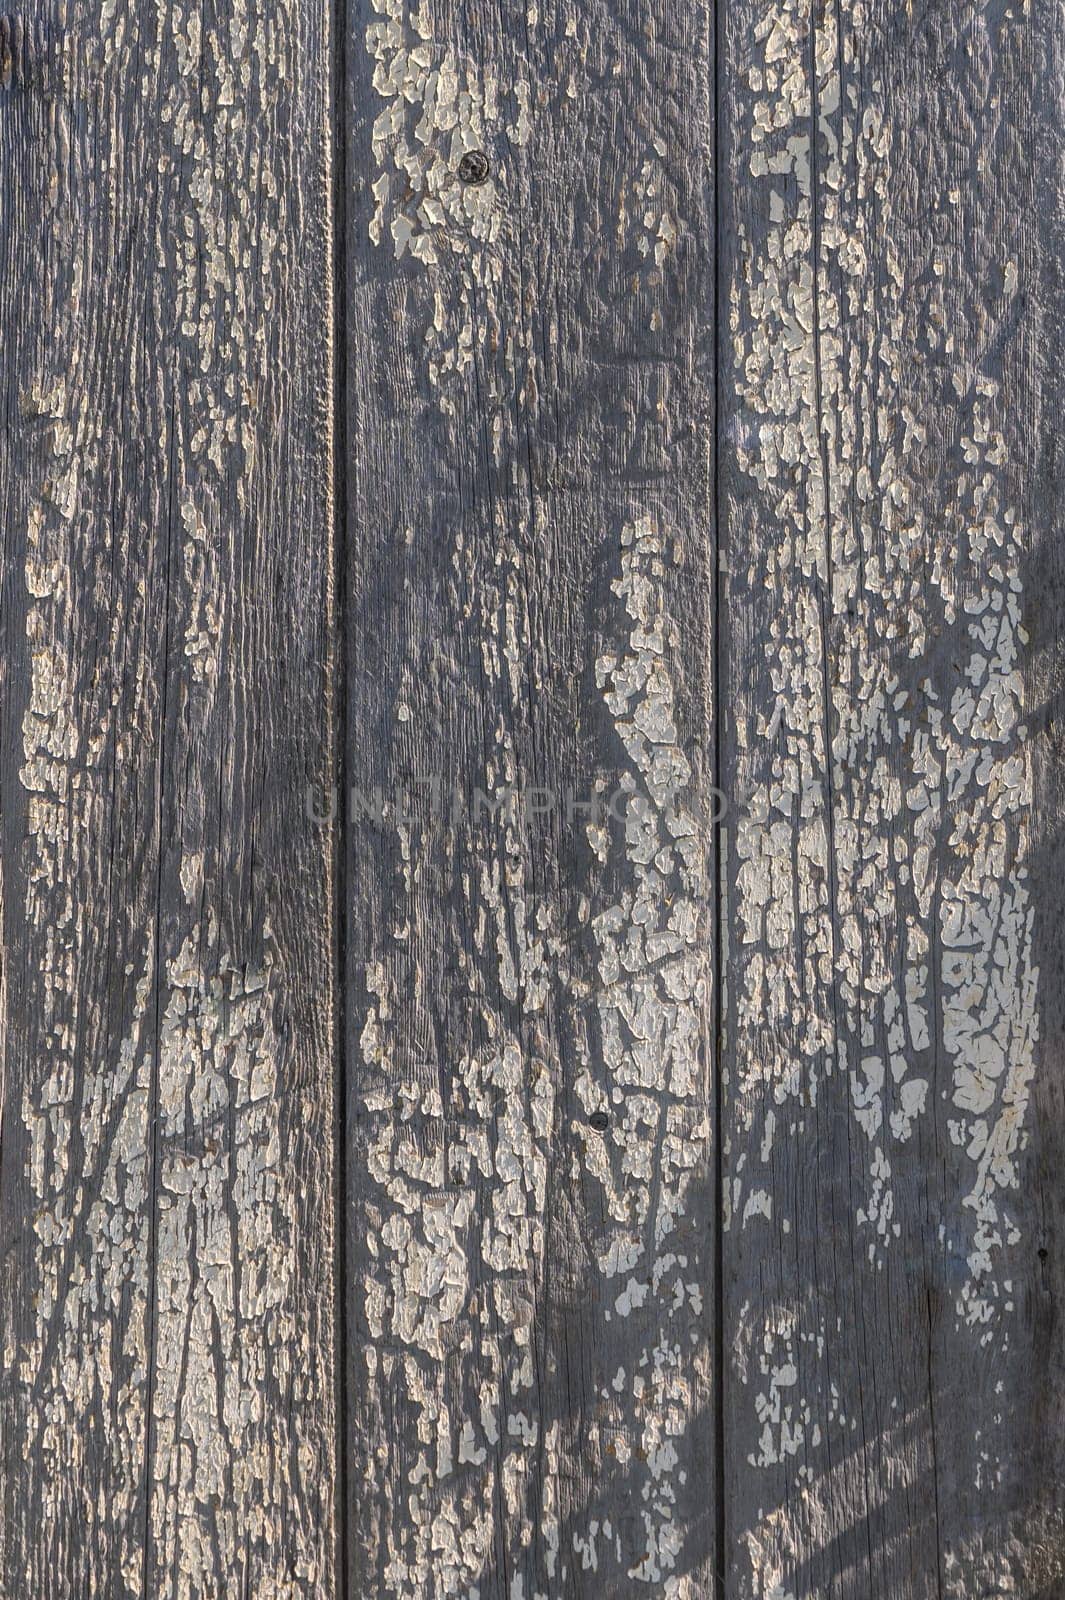 wall of faded boards as a background 1 by Mixa74